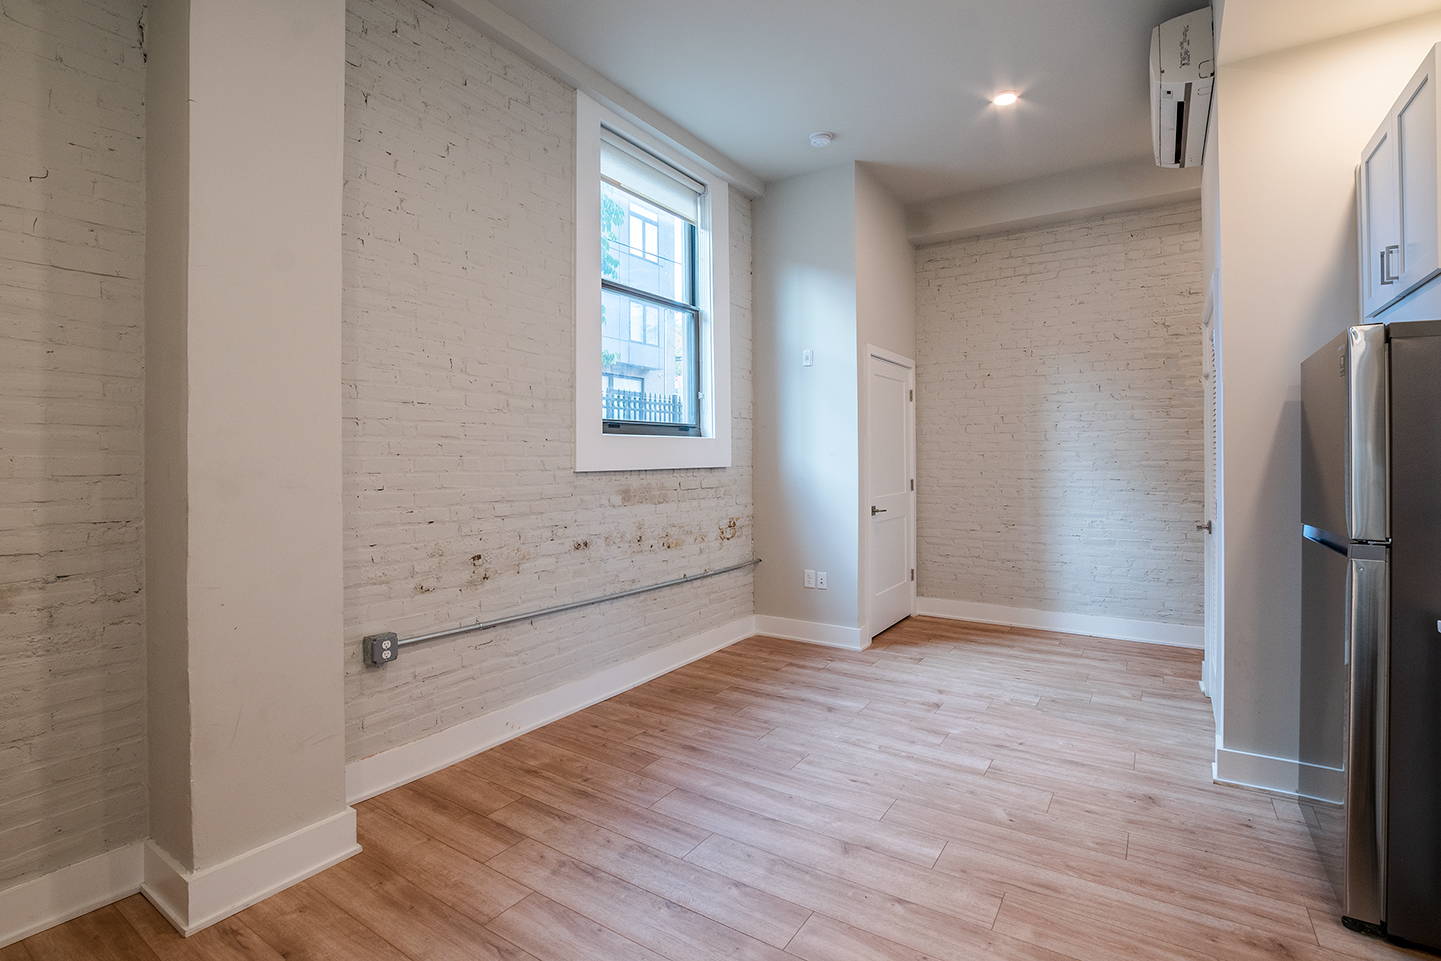 Property Photo For 1300 S. 19th St, Unit 15